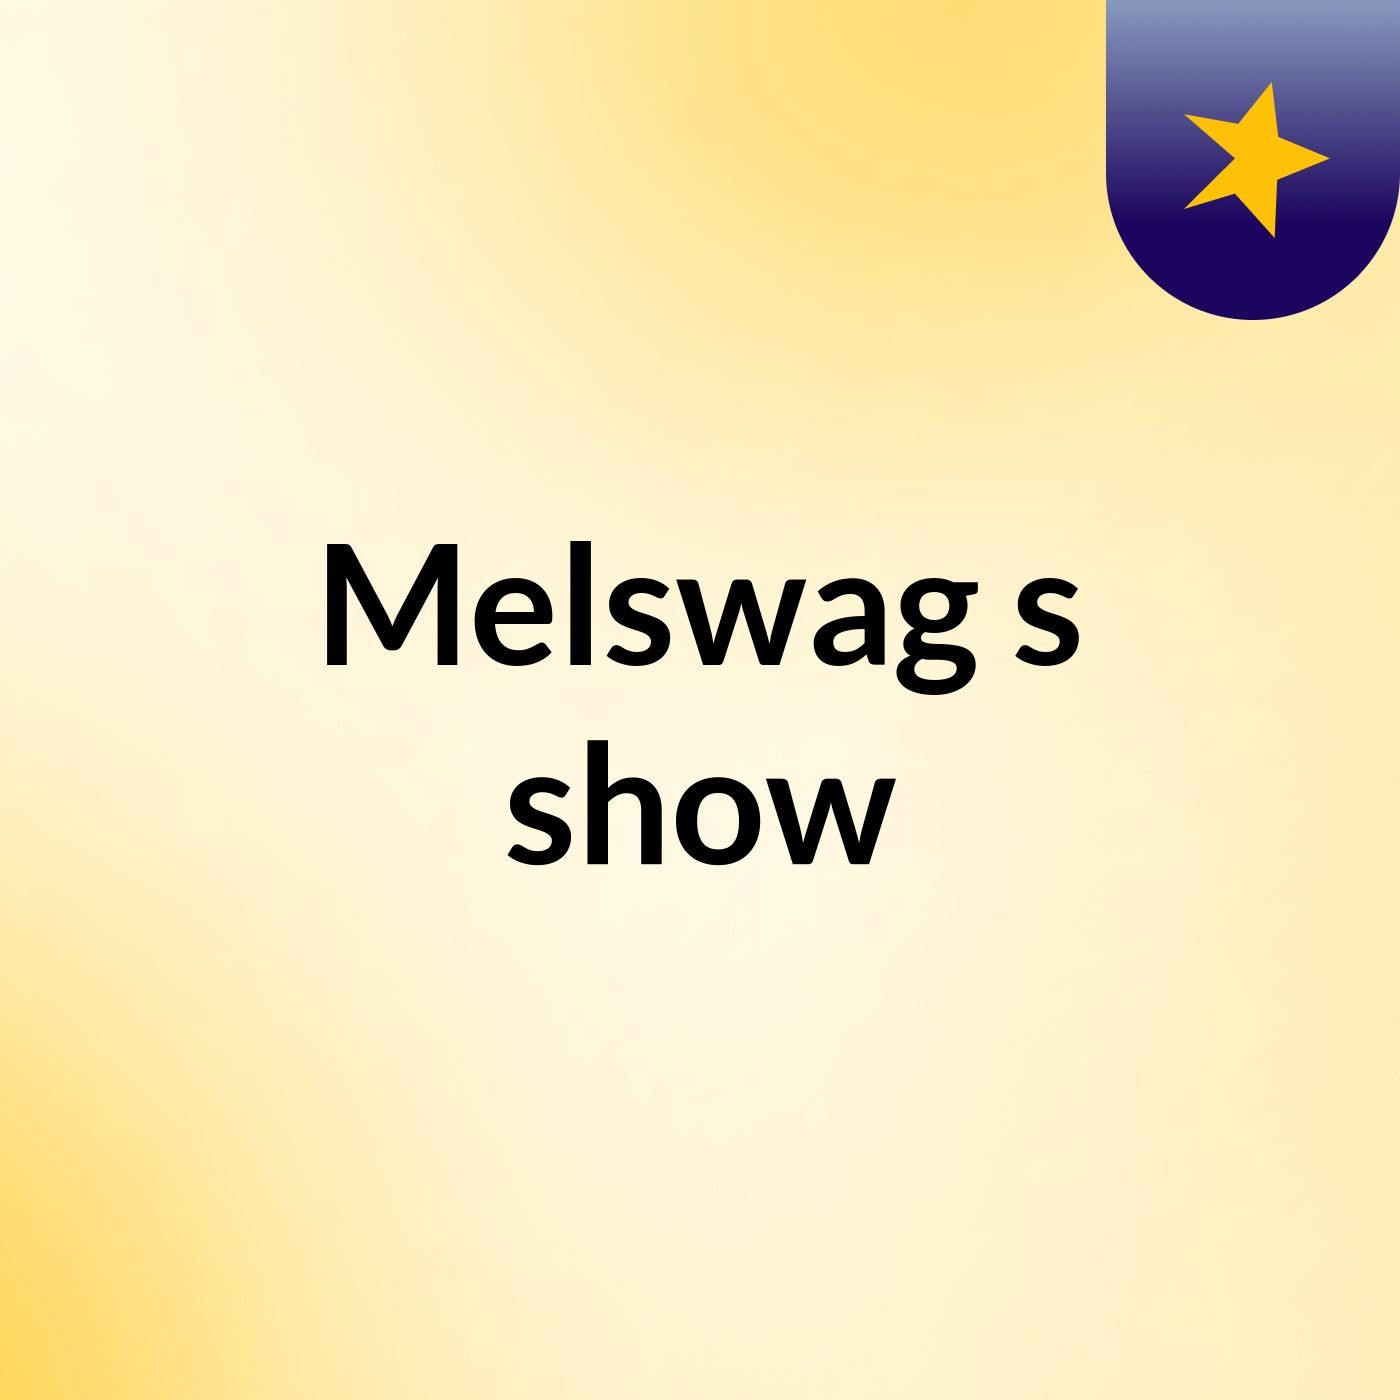 Melswag's show